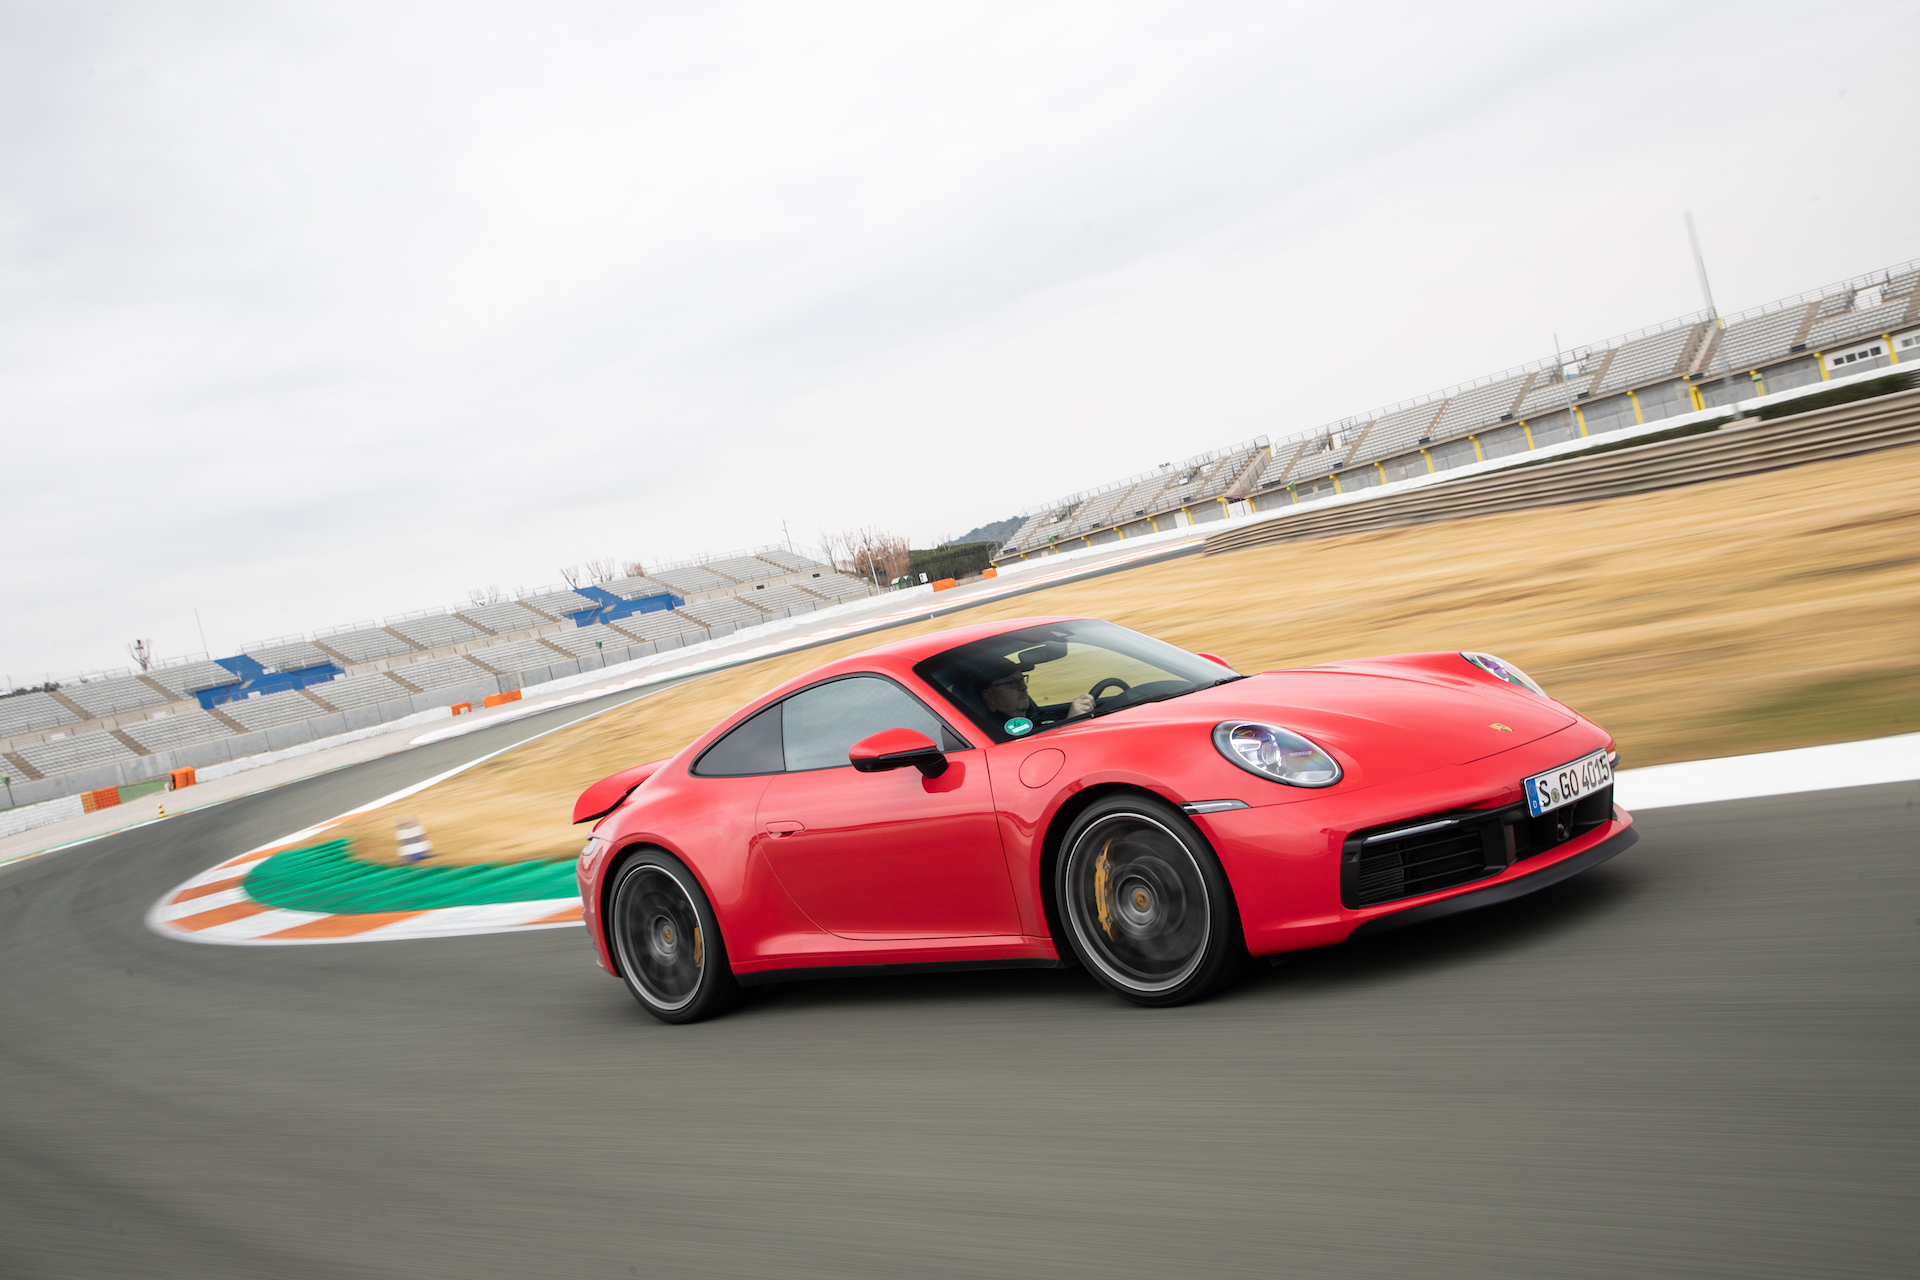 2020 Porsche 911 S and 4S first drive review: Unflappable by design